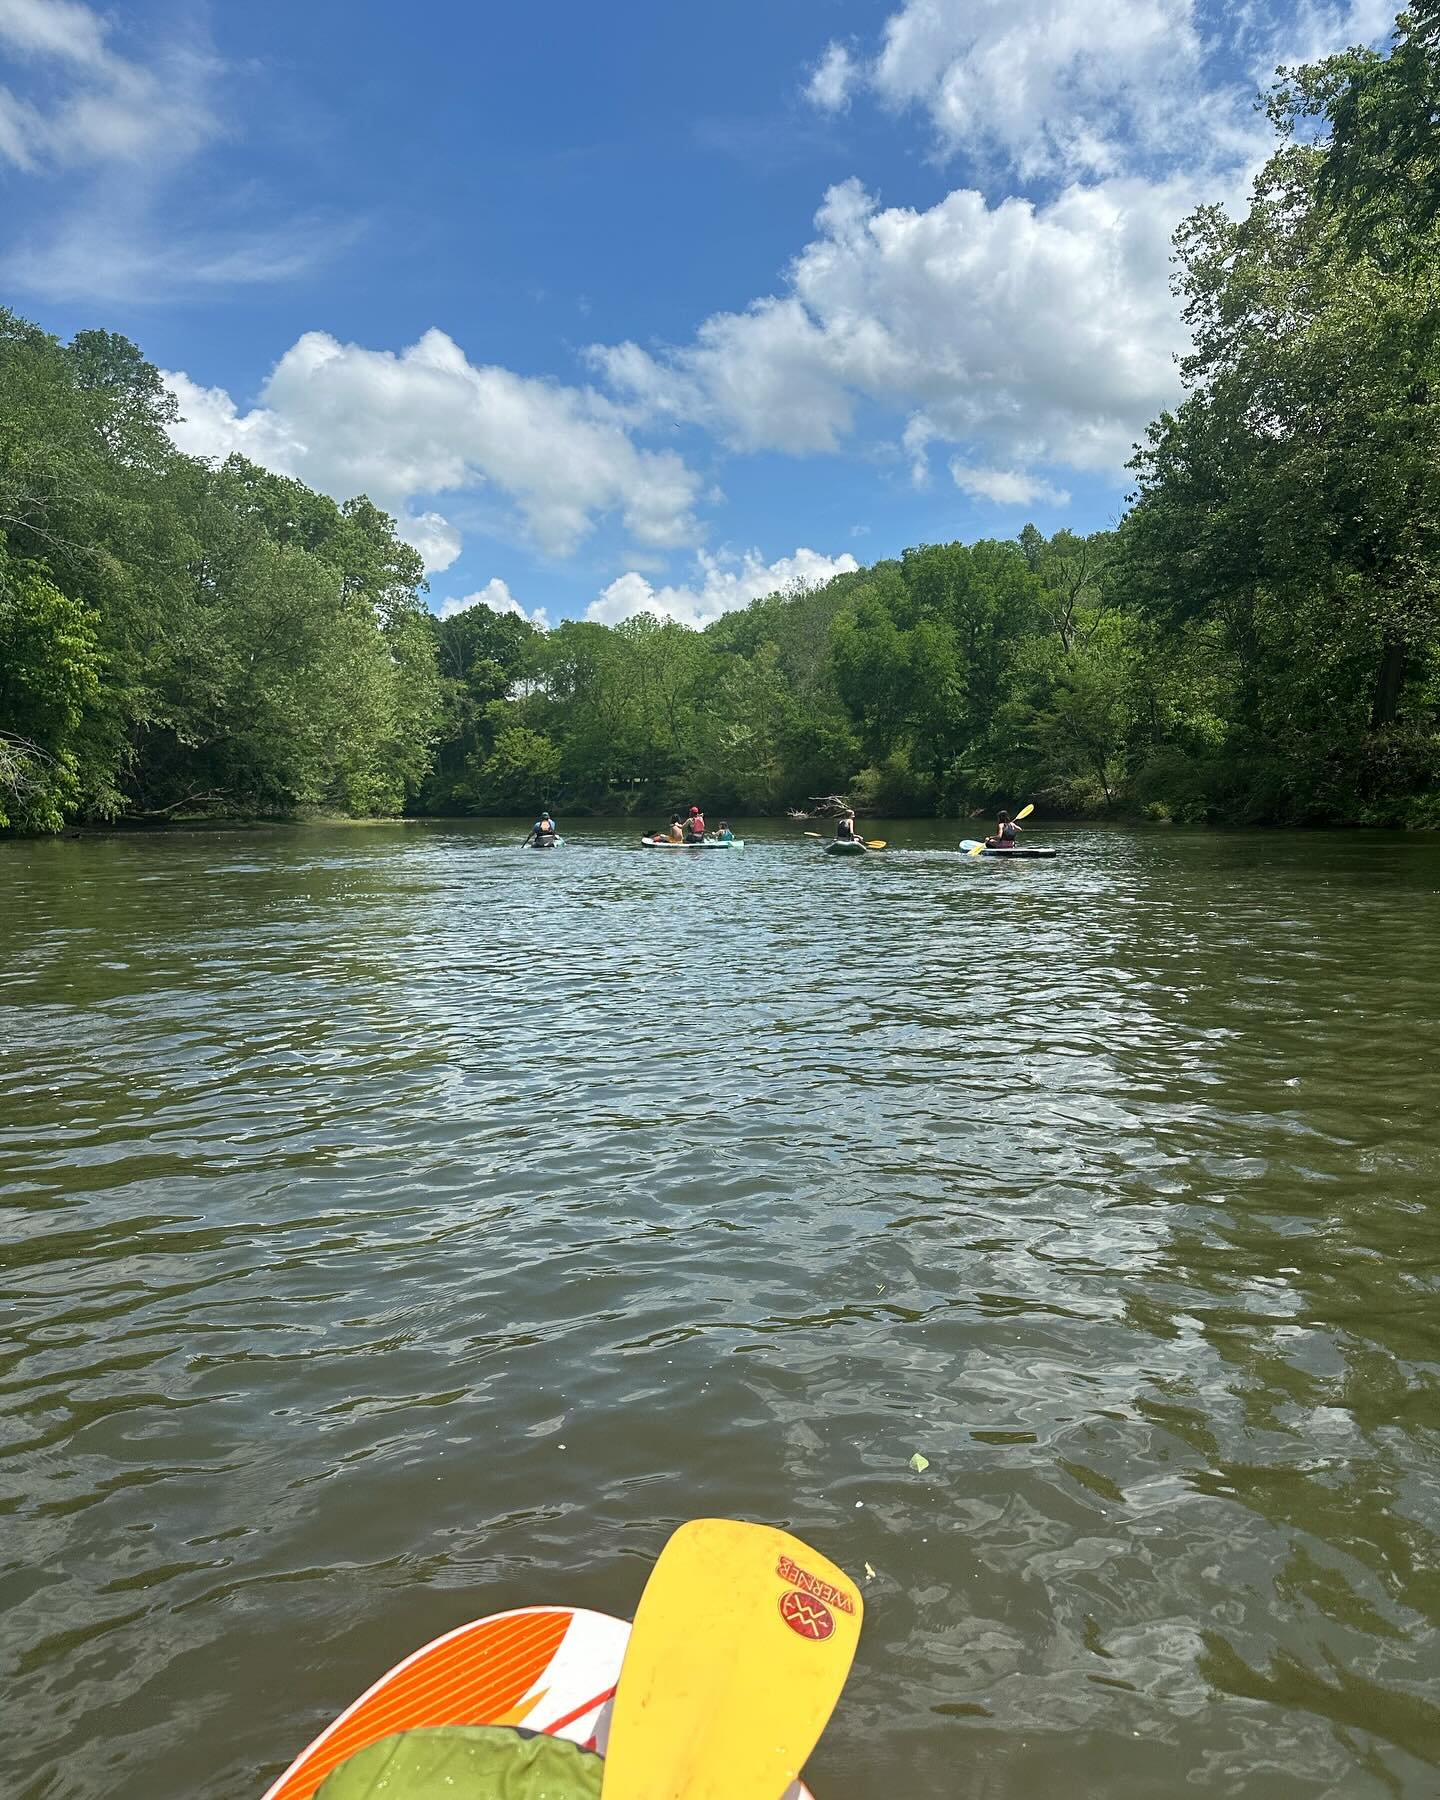 This watershed Wednesday we want to talk about something we are blessed with a lot of in the Little River watershed, which is wildlife biodiversity!

Recently, on a weekend paddle down the Little River, some of our board members (as seen in the first